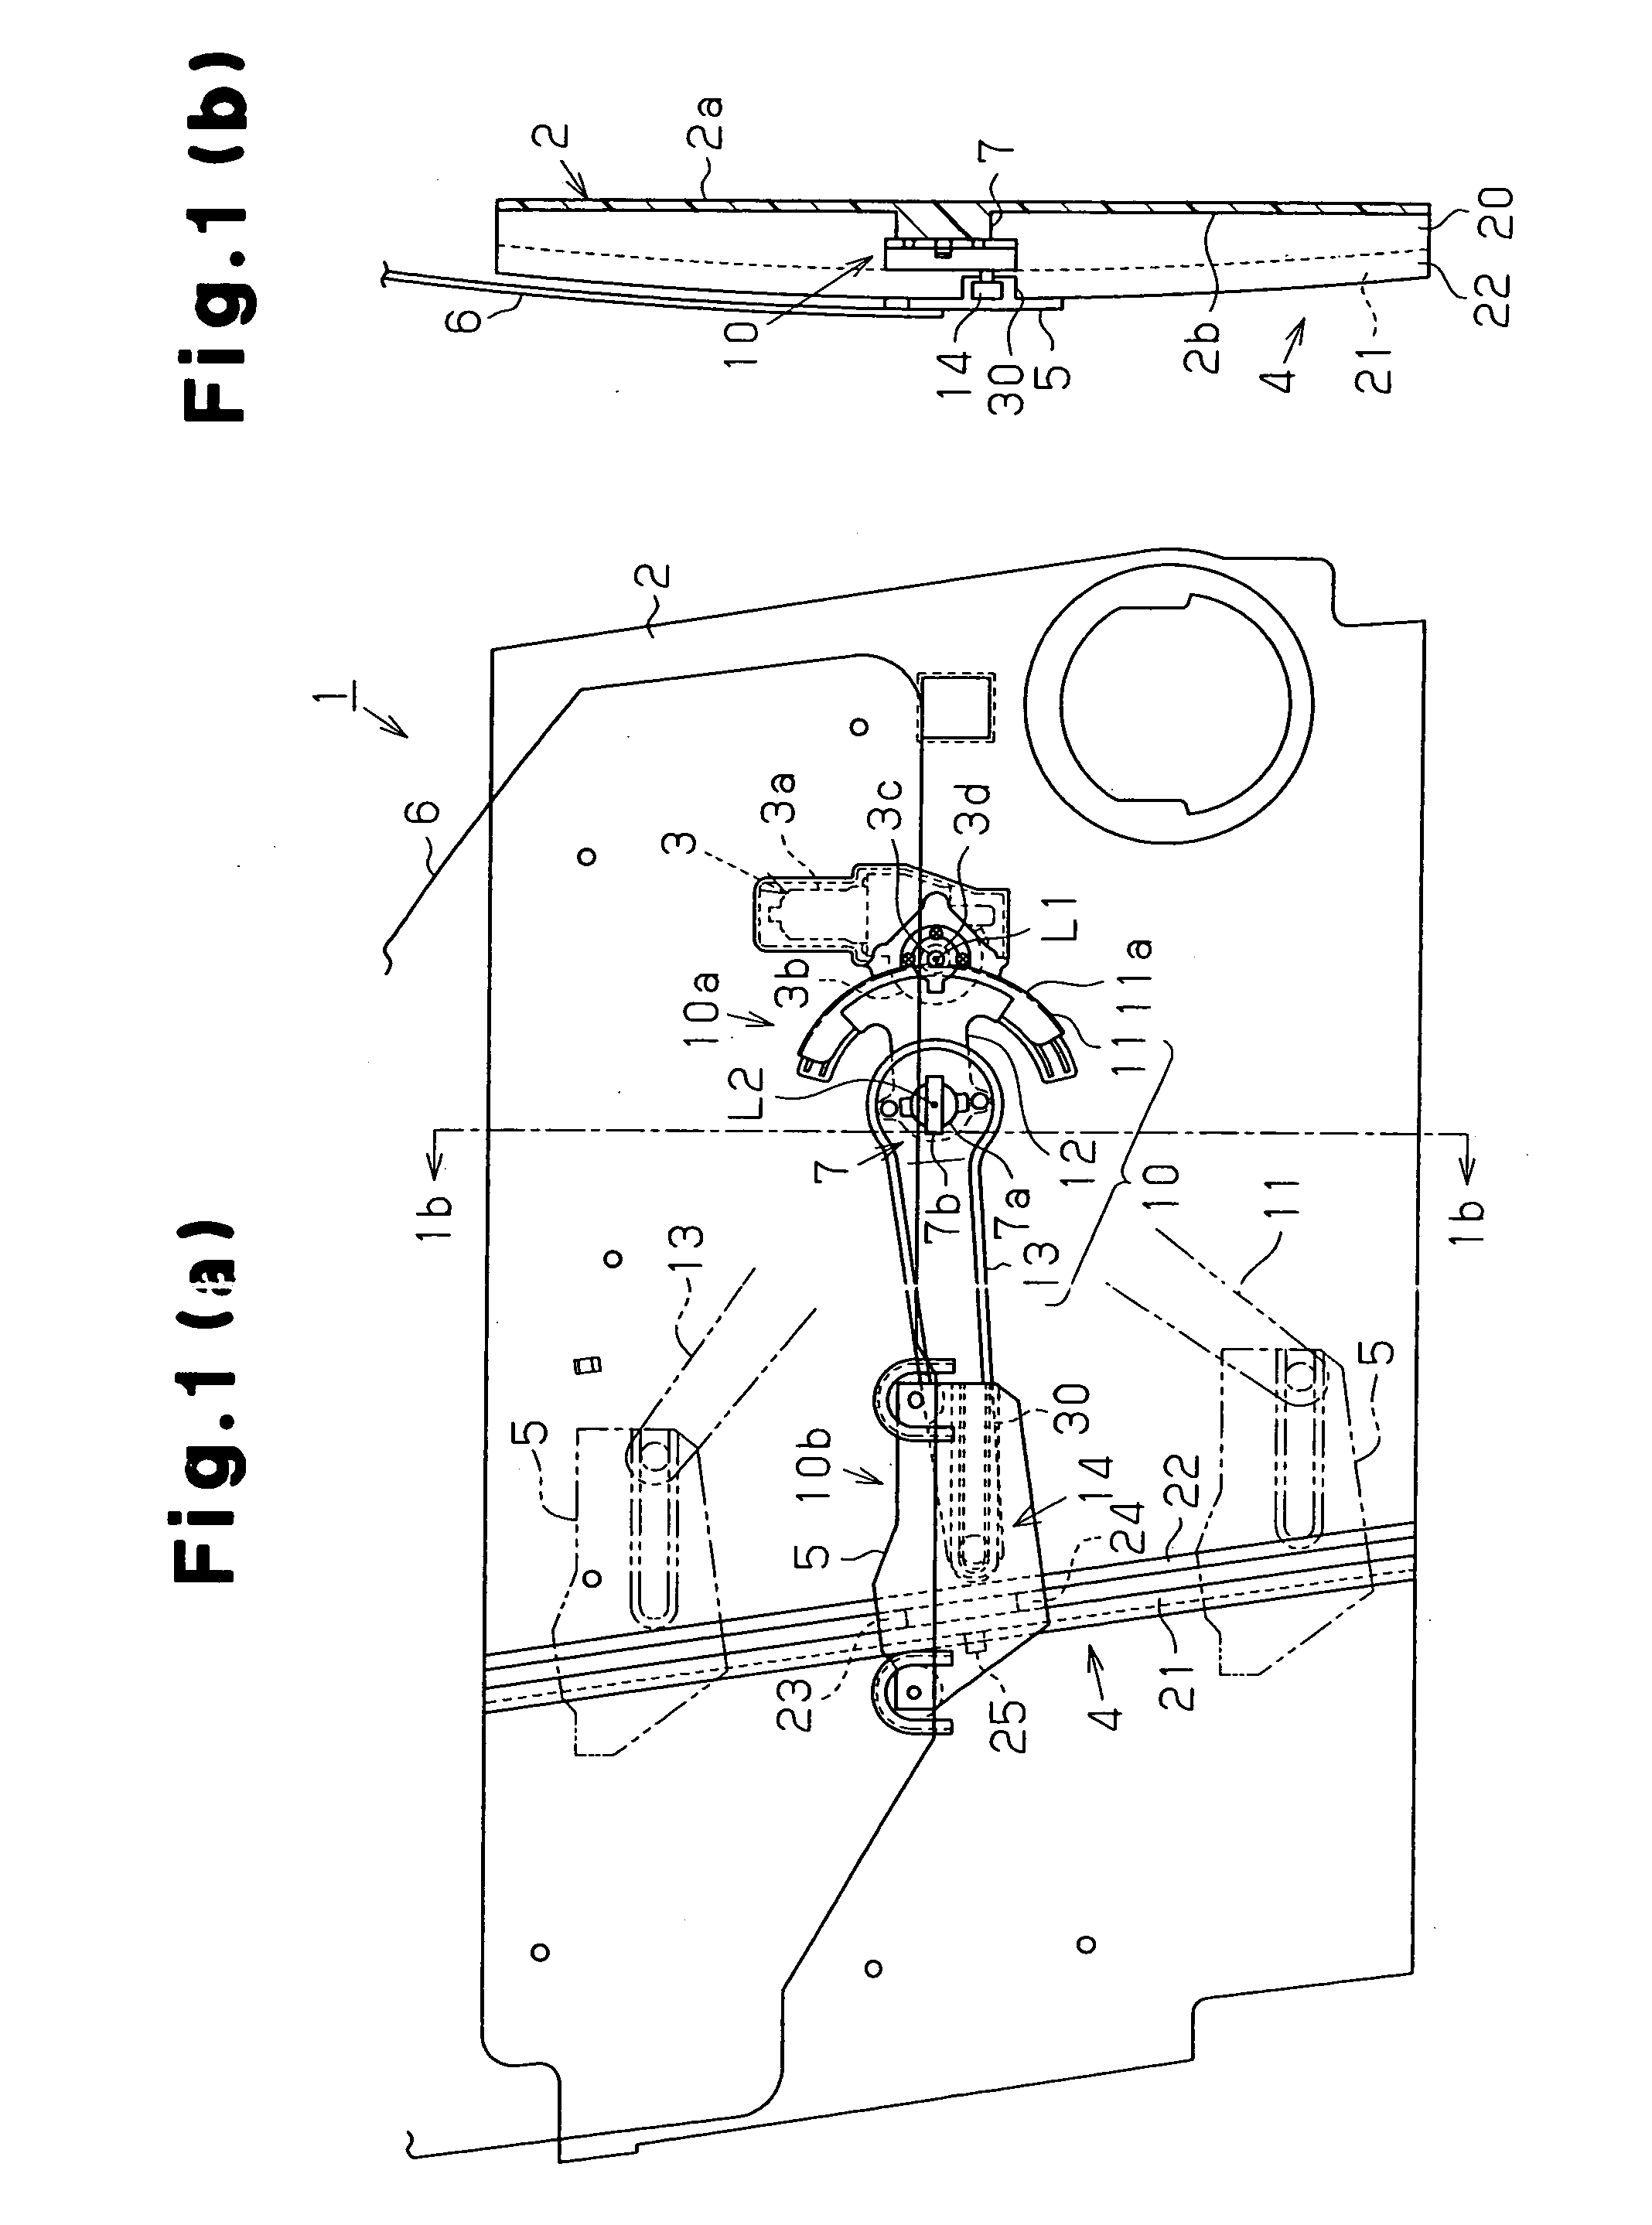 Module for incorporation into a door